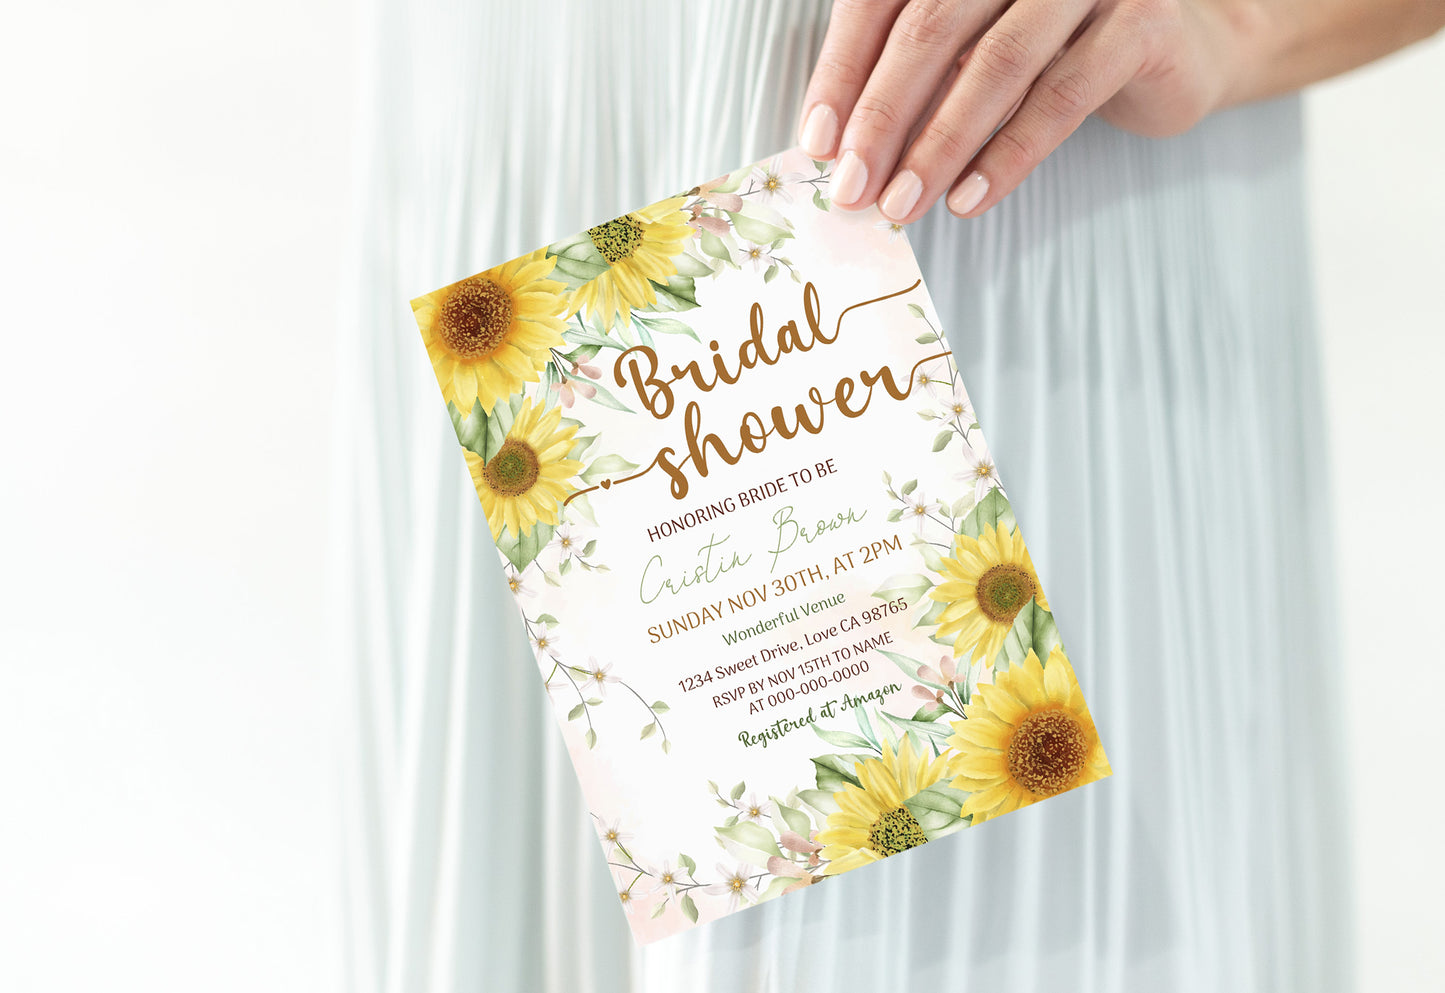 Sunflower Bridal shower invitation, Editable Yellow Floral Bride To Be Shower Invite - 56Aw